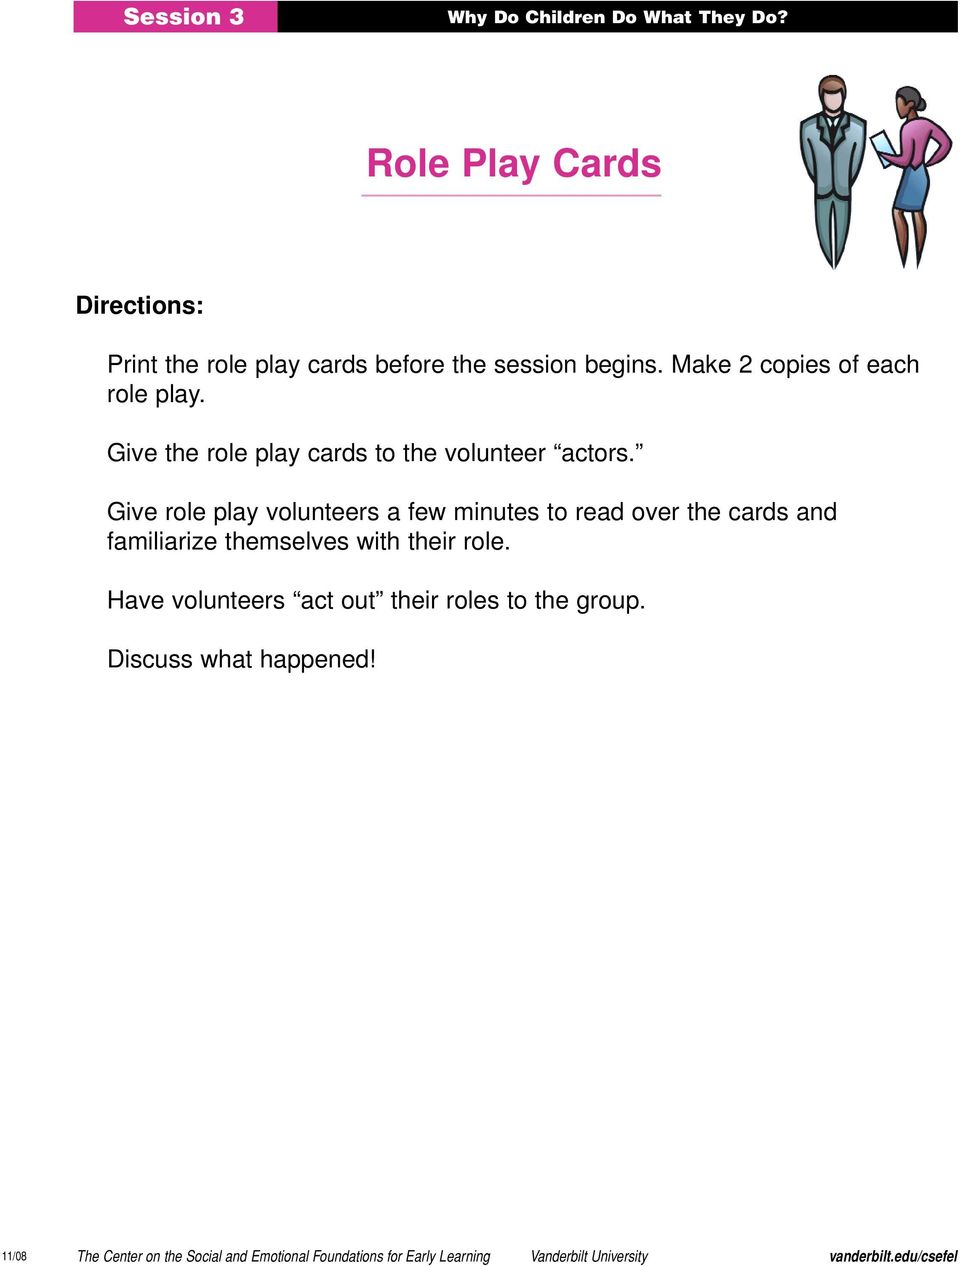 Give role play volunteers a few minutes to read over the cards and familiarize